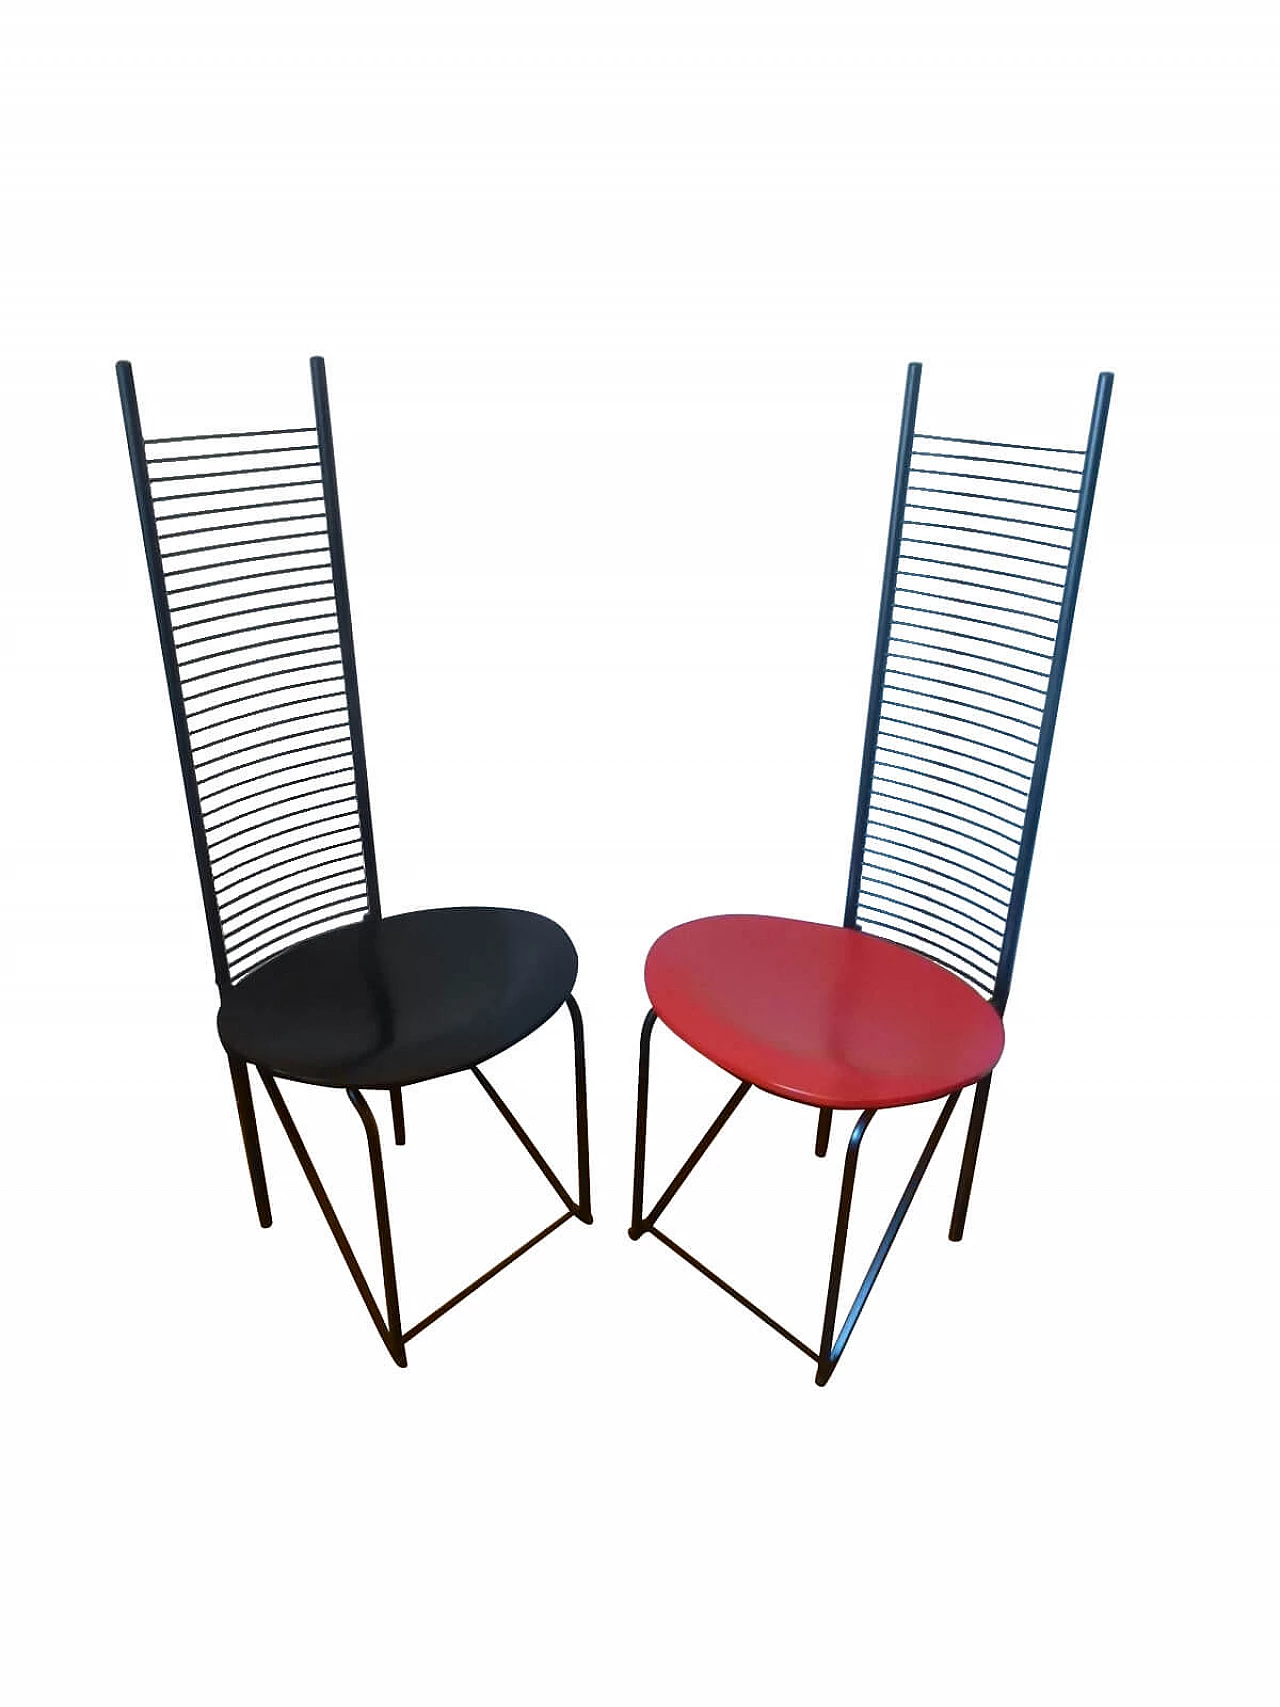 Pair of Drinky chairs produced by Danber, 2000s 1104699